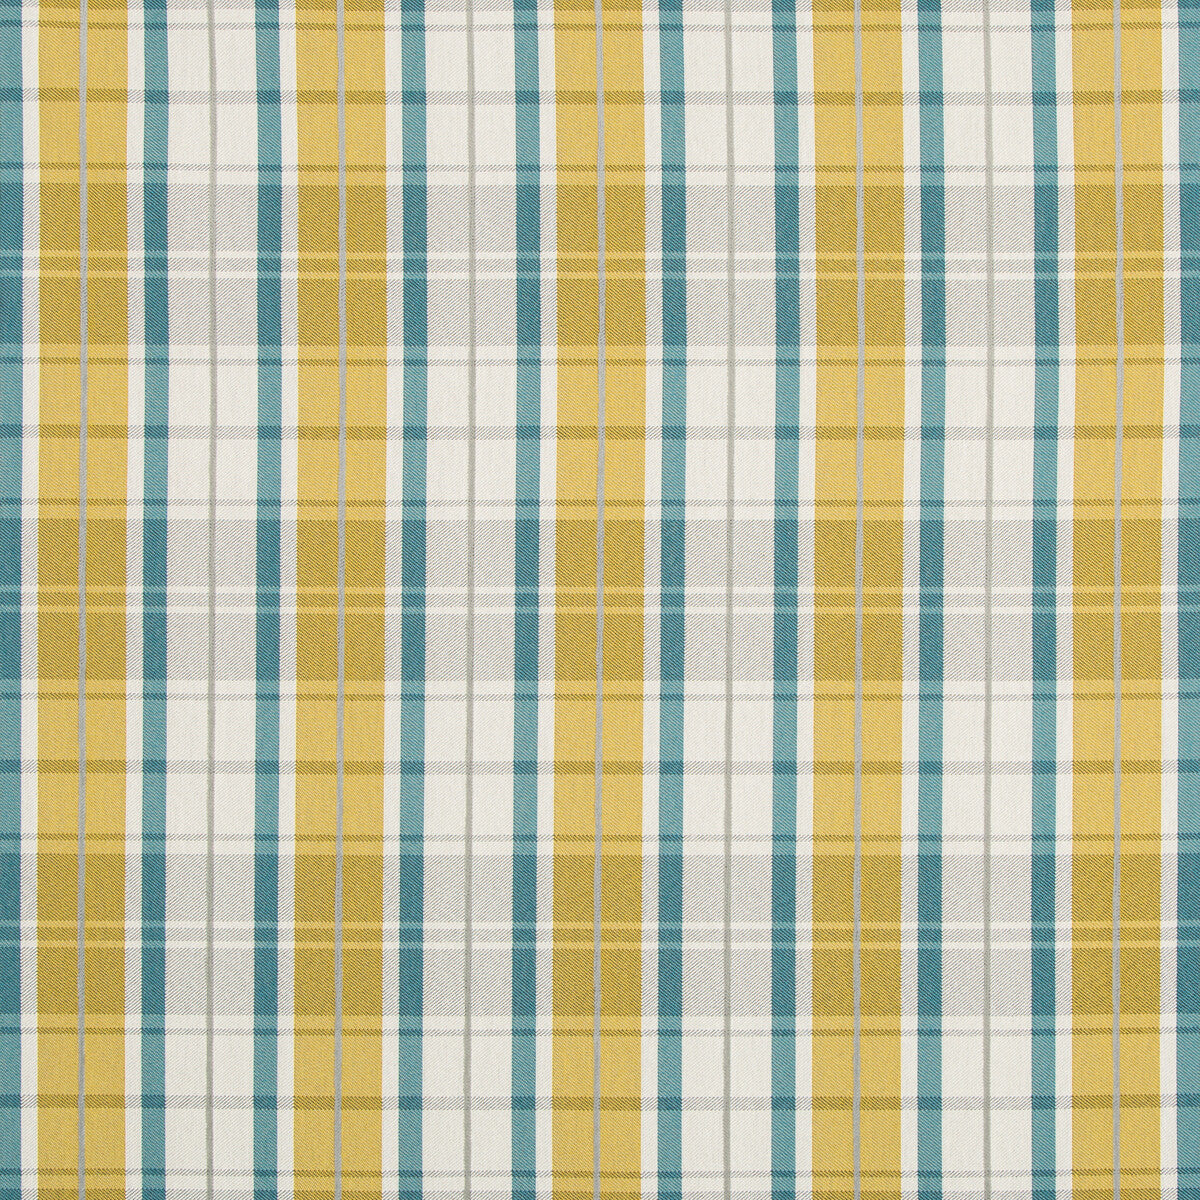 Ardsley fabric in lagoon color - pattern 35888.413.0 - by Kravet Contract in the Gis Crypton collection